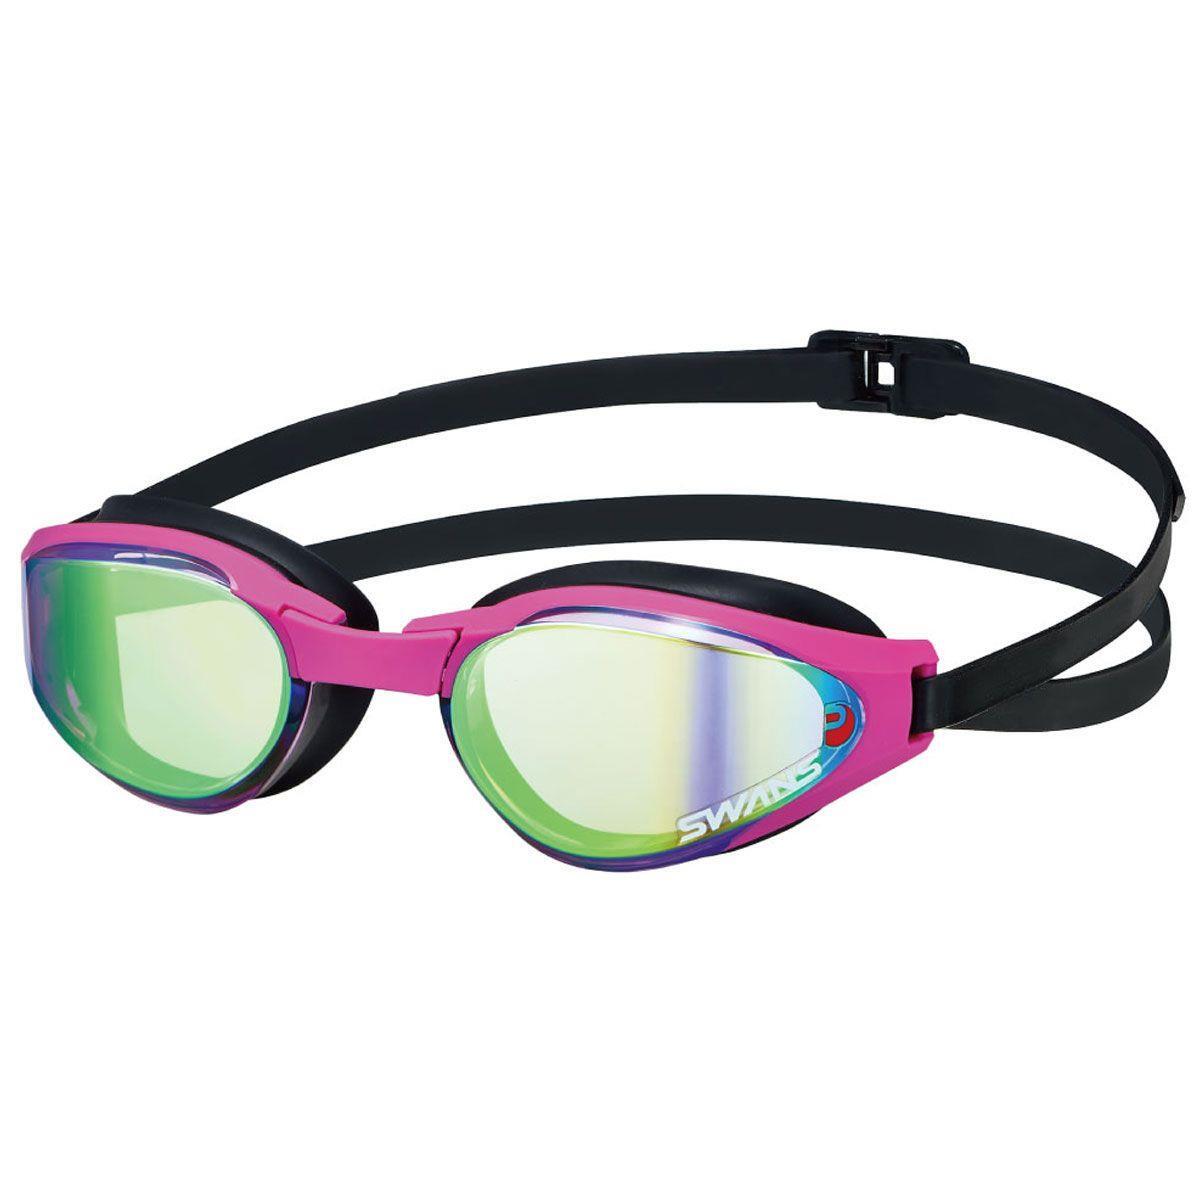 SWANS Swans SR81 Ascender Mirrored Goggles- Pink / Yellow